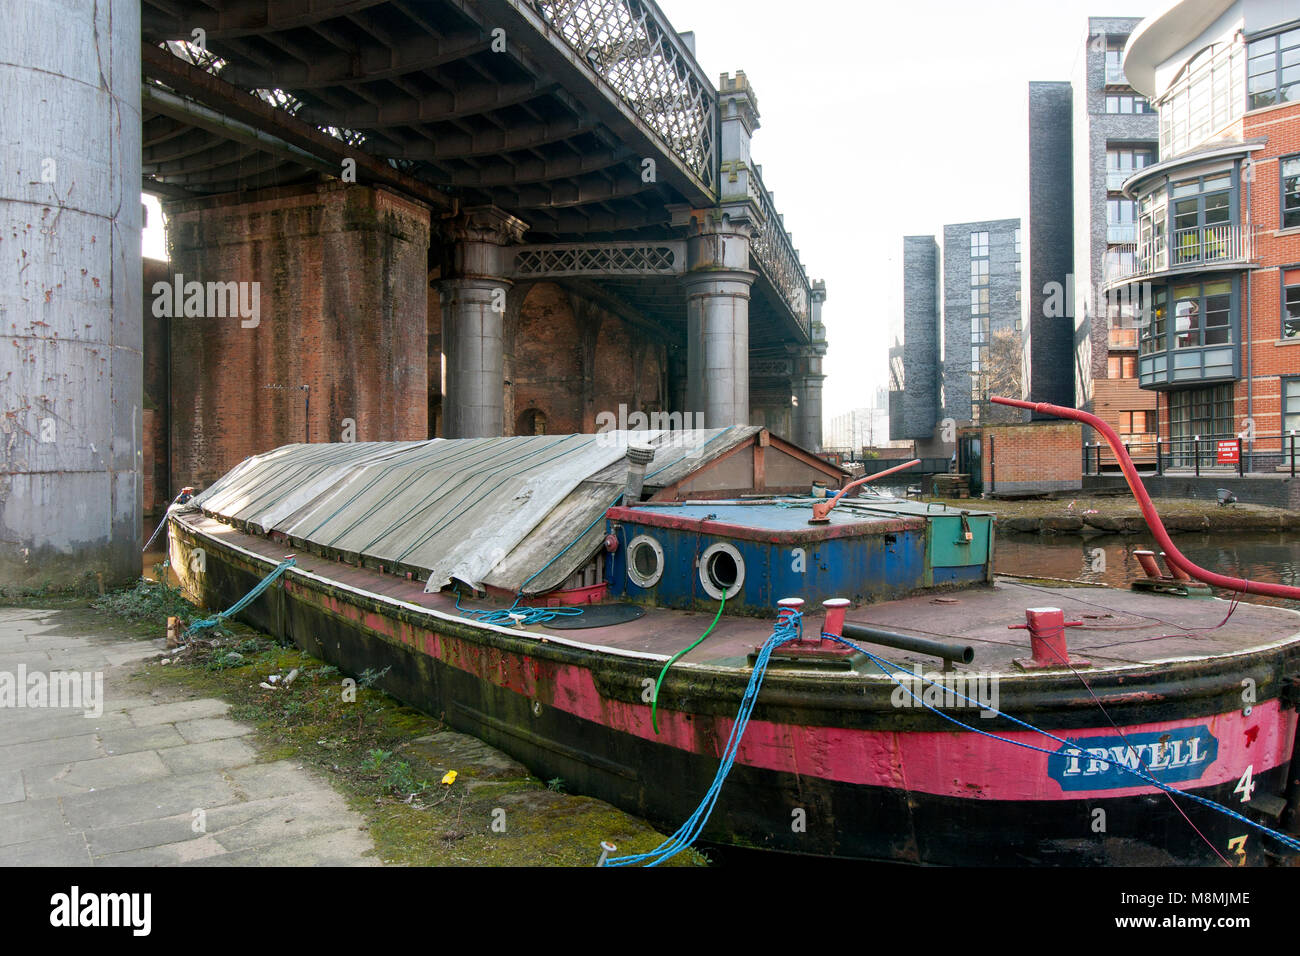 Irwell Barge, Castlefield,Manchester Foto Stock